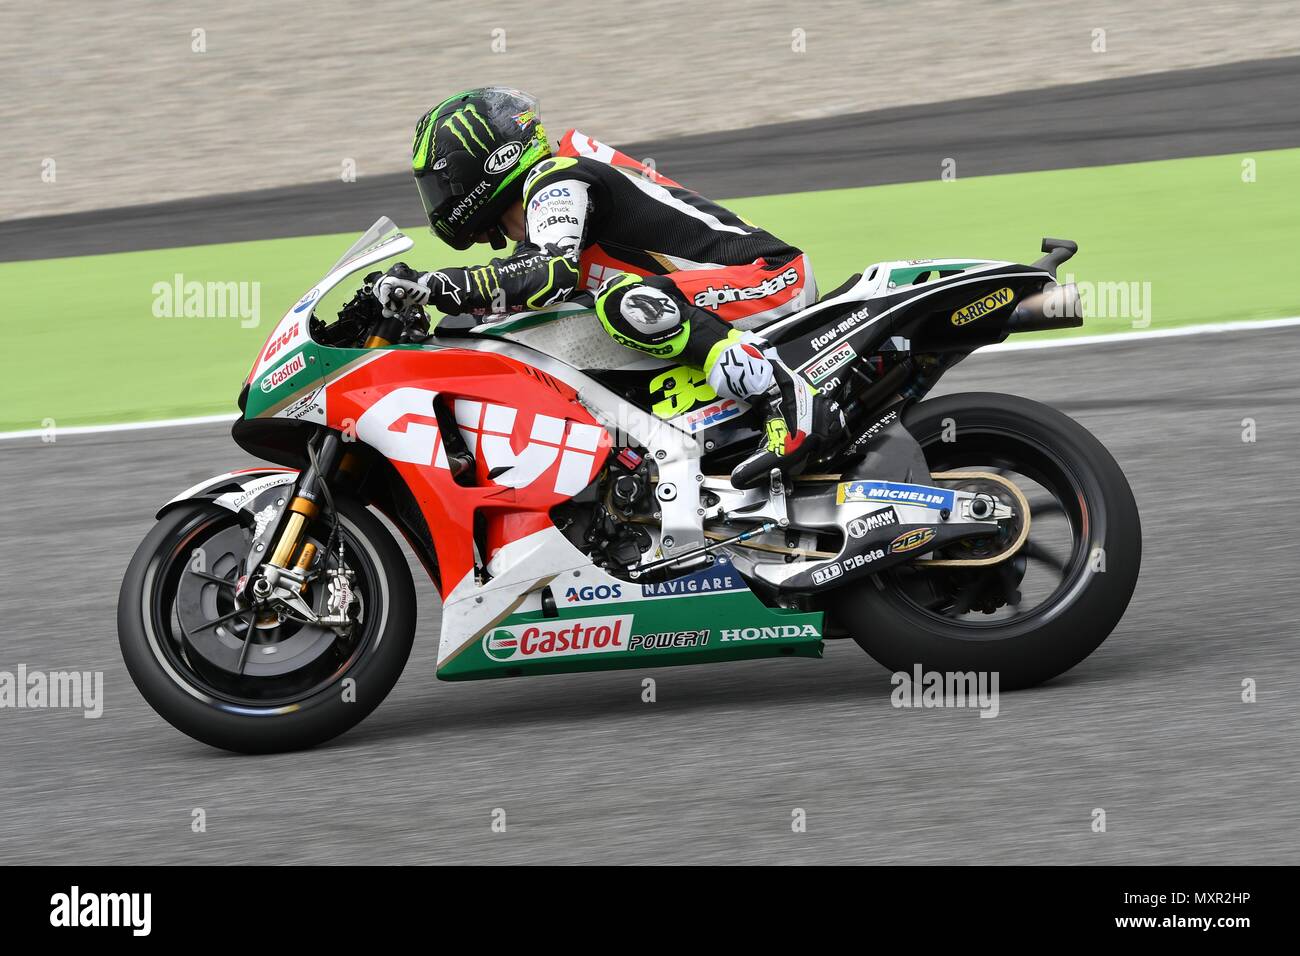 Mugello - ITALY, 2 JUNE: British LCR Honda Castrol Team Rider Cal Crutchlow during Qualifying session at 2018 GP of Italy of MotoGP on June, 2018. Stock Photo